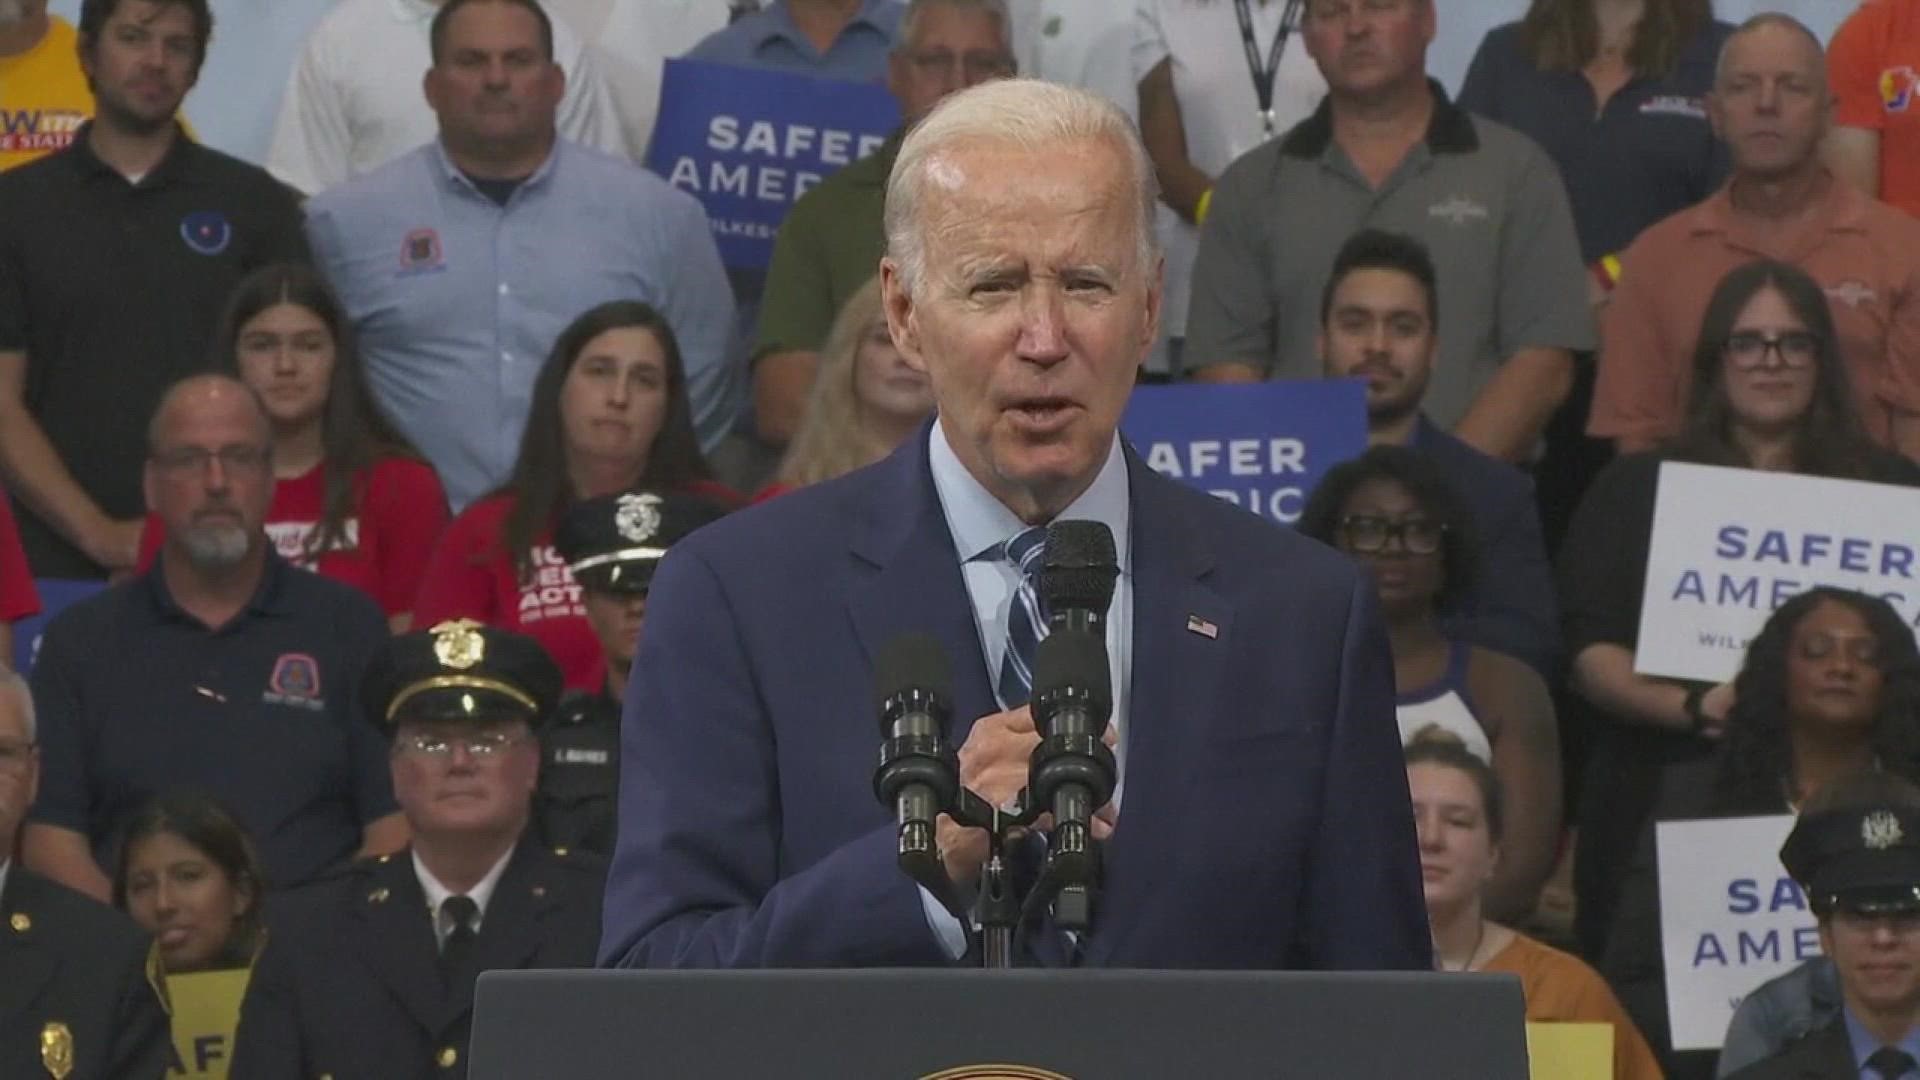 "This has taken too long, too much of a trail of bloodshed and carnage," President Biden said during his address in the battleground state of Pennsylvania.